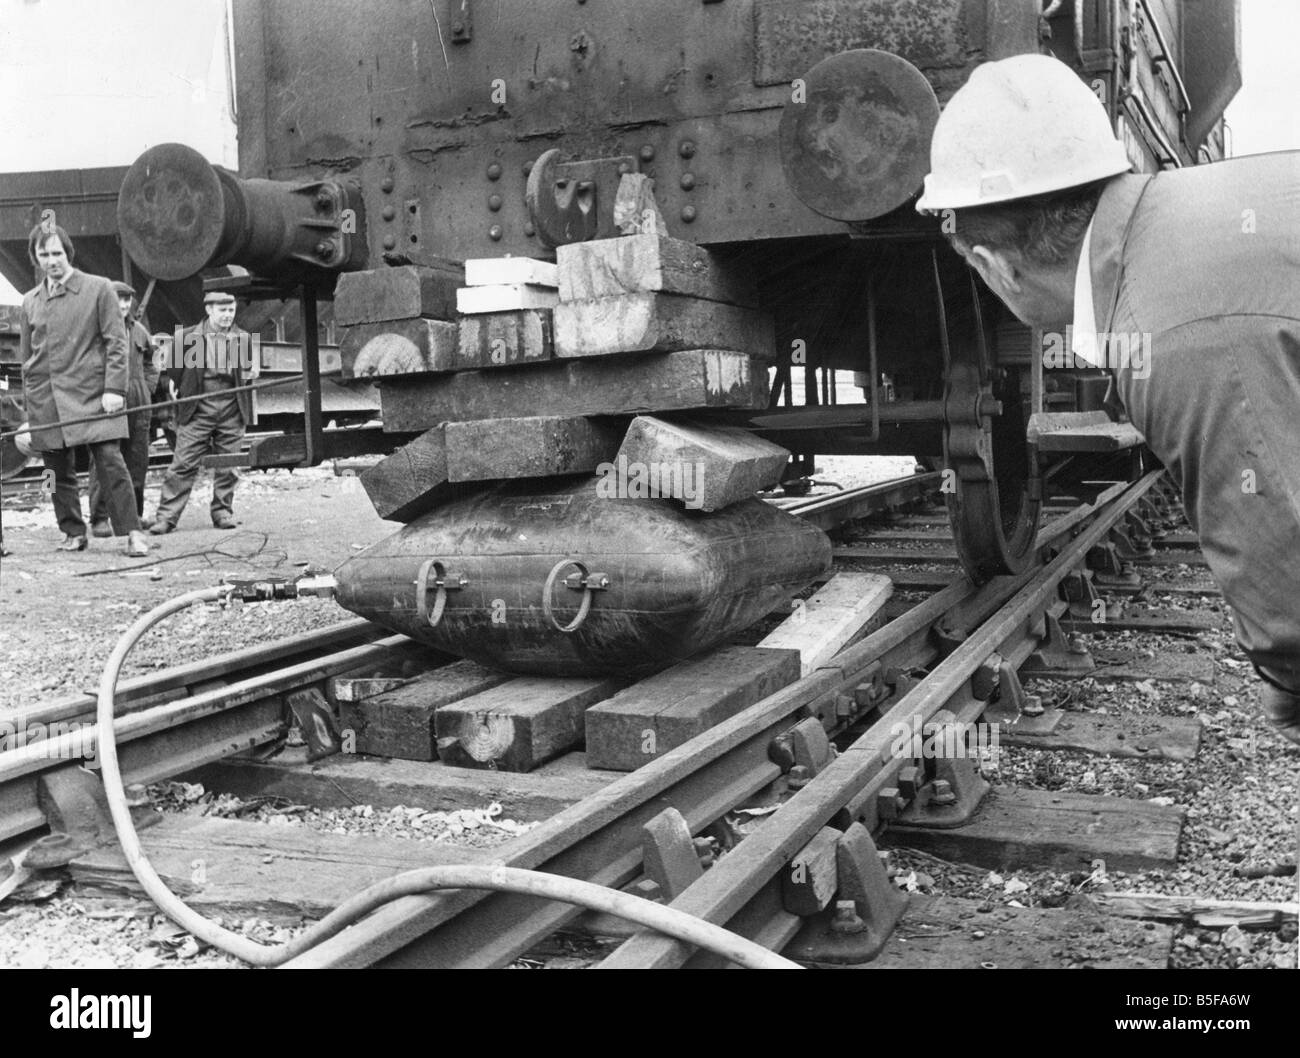 The first demonstation in England of the inflatable rubber cushions took place at the British Rail Wagon Repair Depot at South Shields The steel reinforced cushions can be filled with water or air and used to release trapped people in motorway crashes Stock Photo